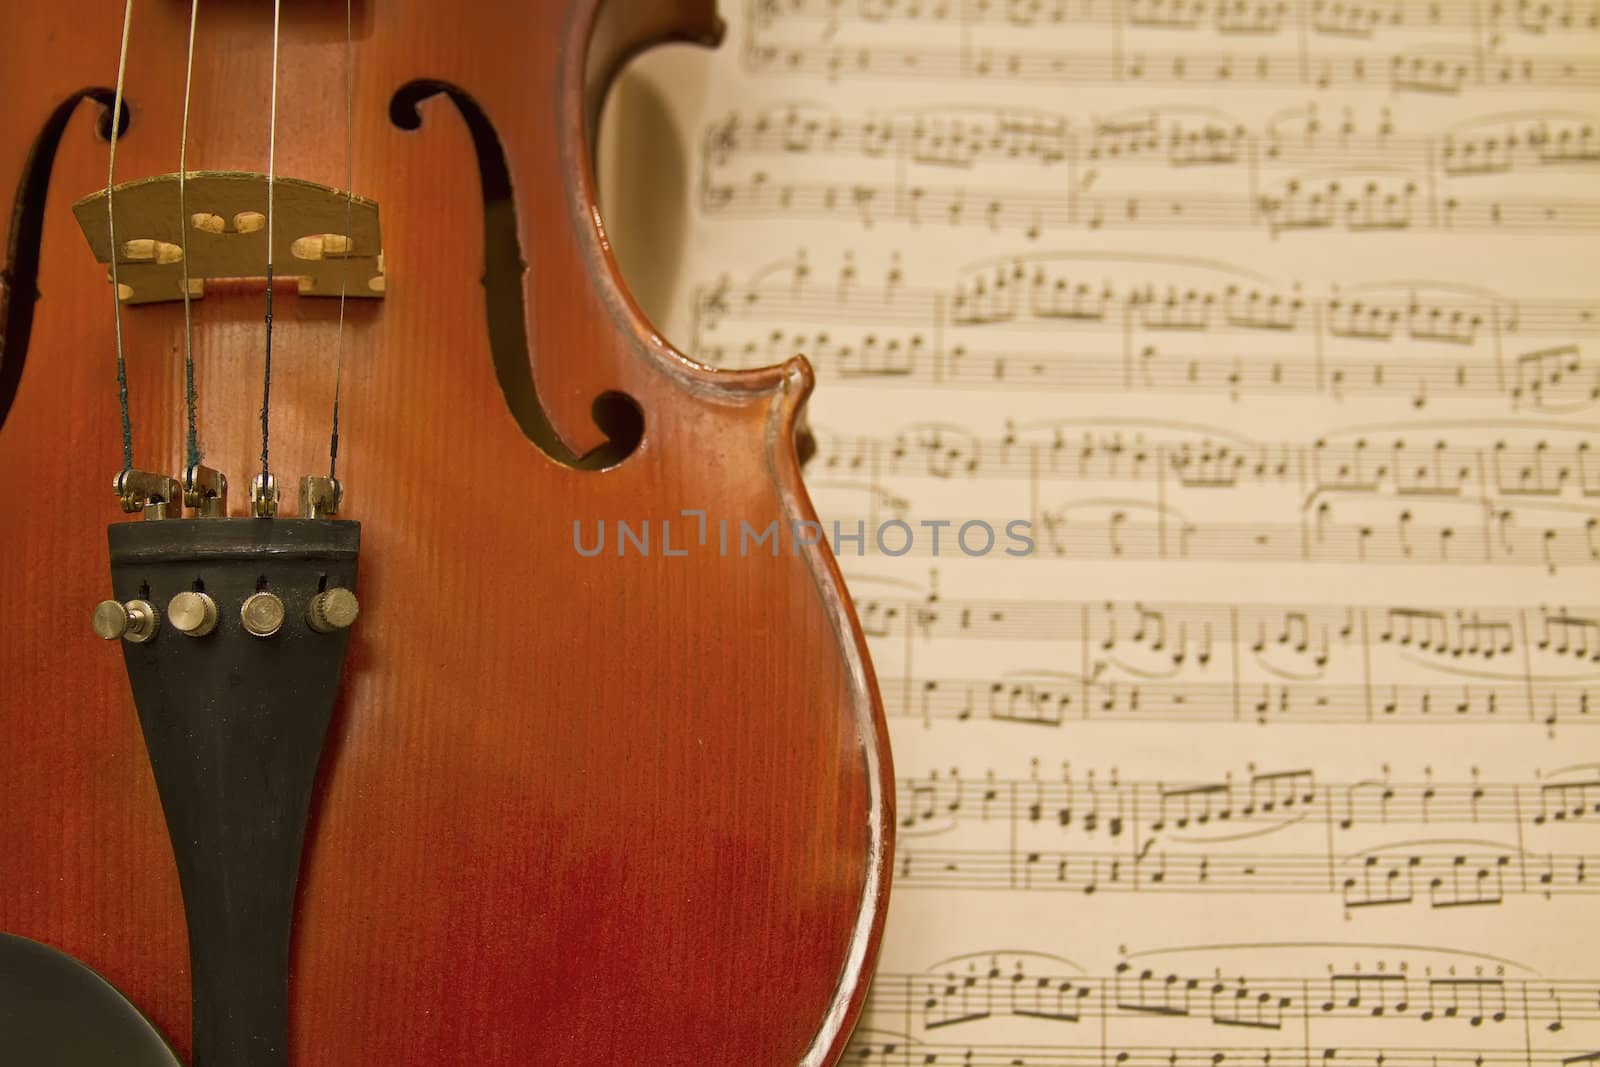 Violin with Music Sheets by Davidgn